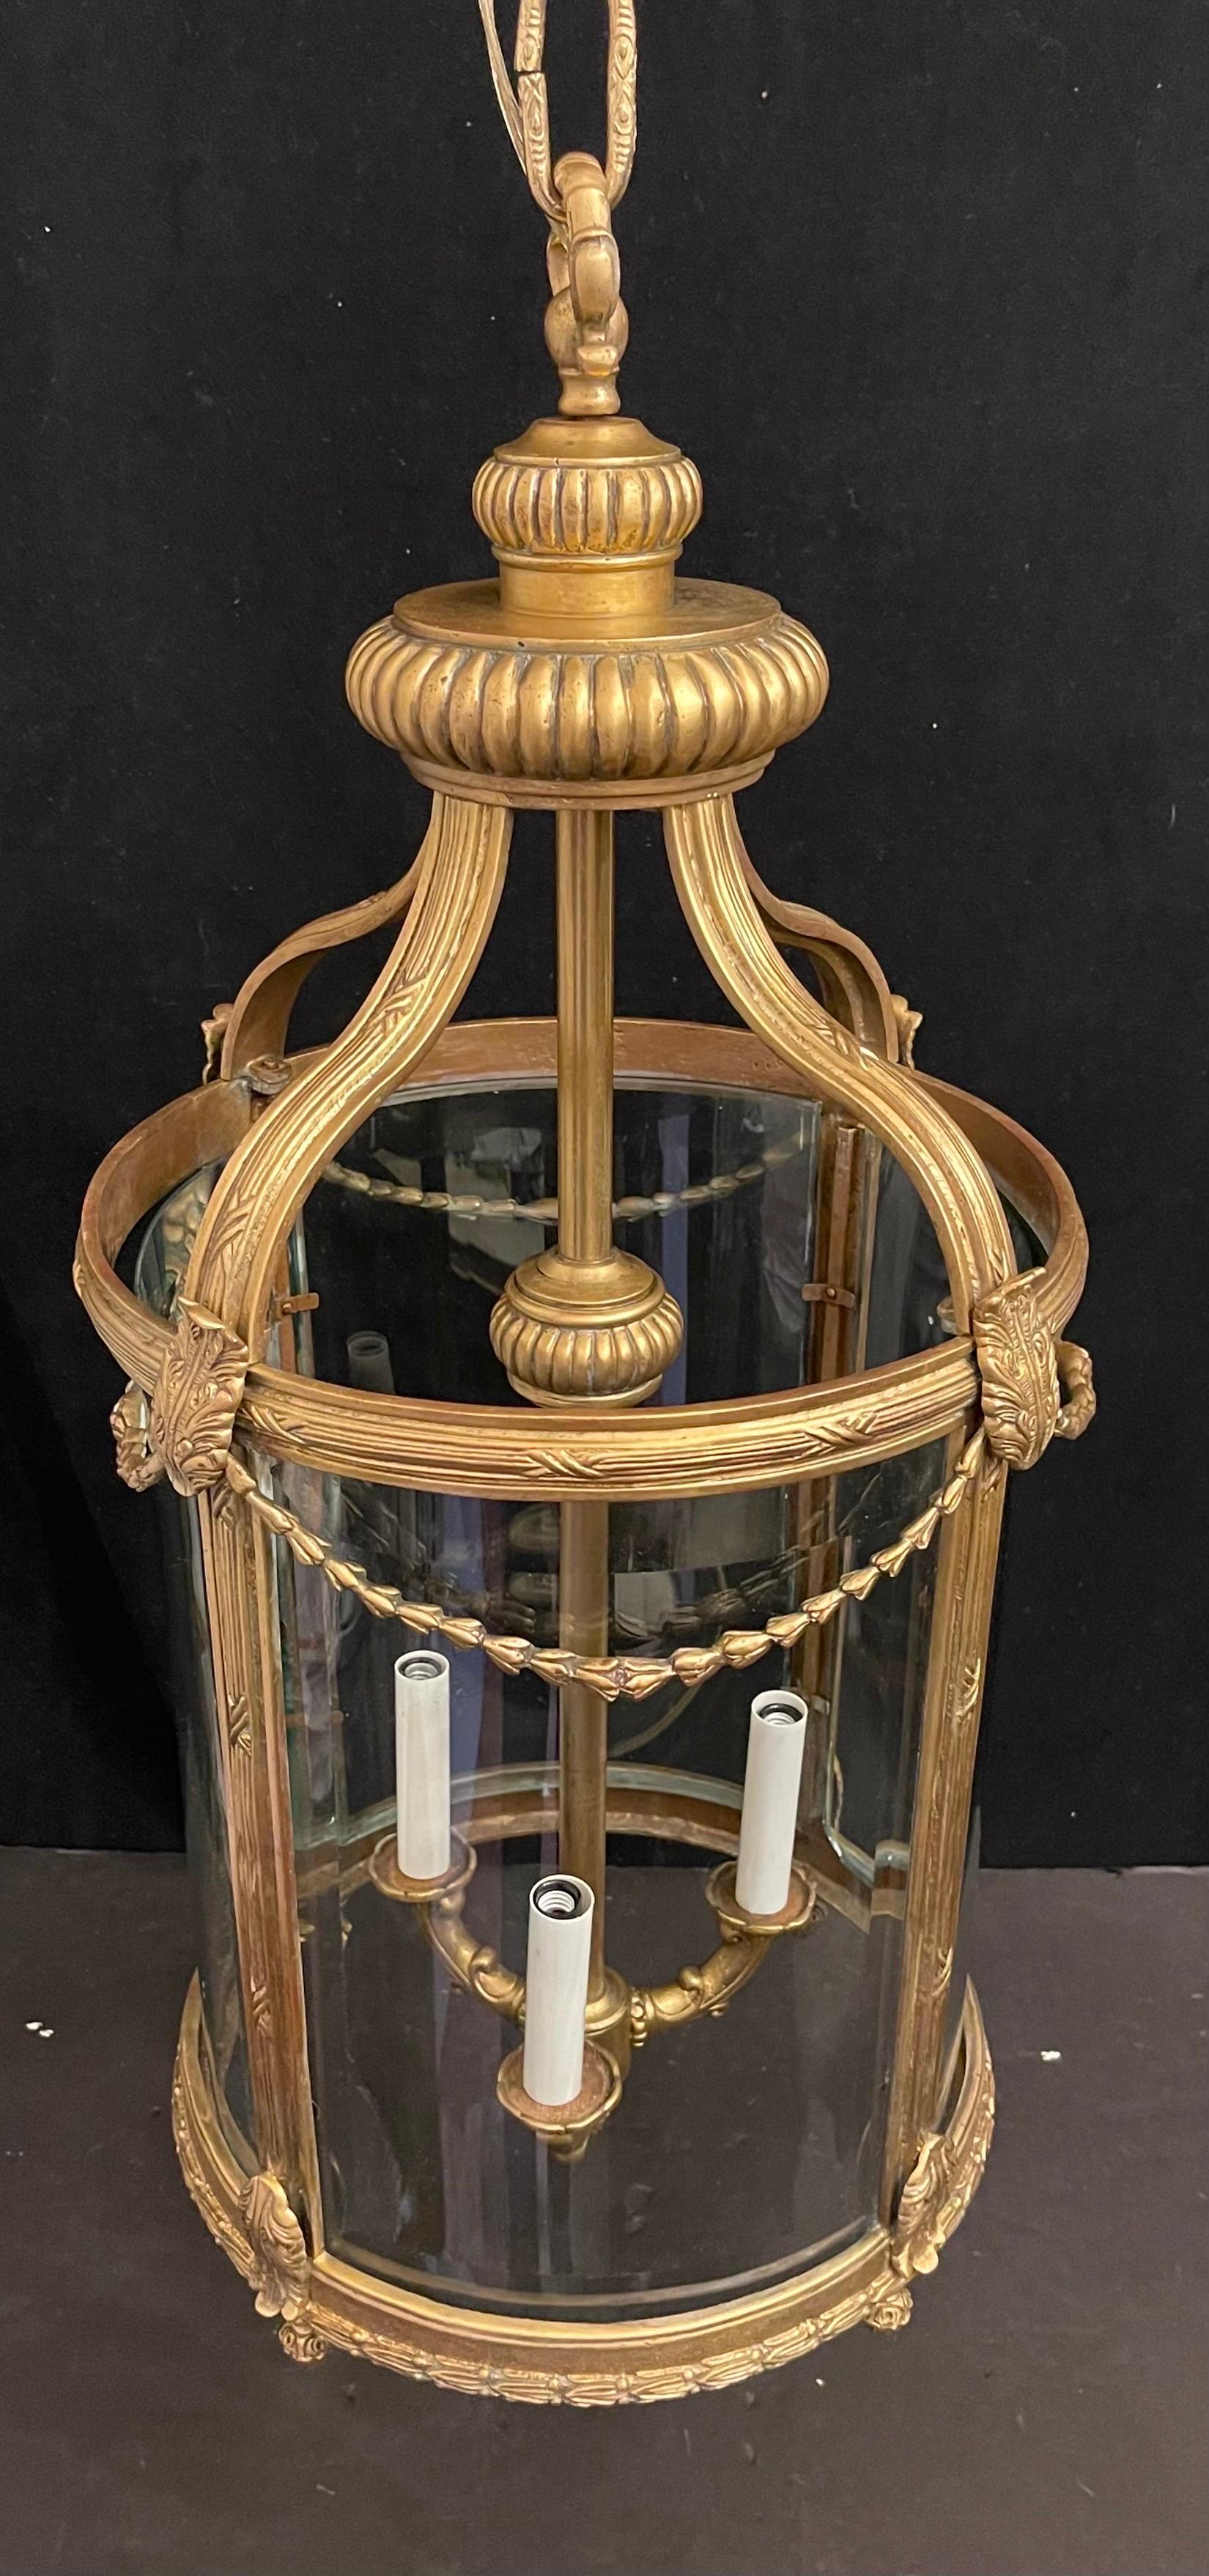 A Wonderful French Ormolu Bronze Filigree Swag Three Candelabra Light Large Regency Style Lantern Fixture
Completely Rewired With New Sockets